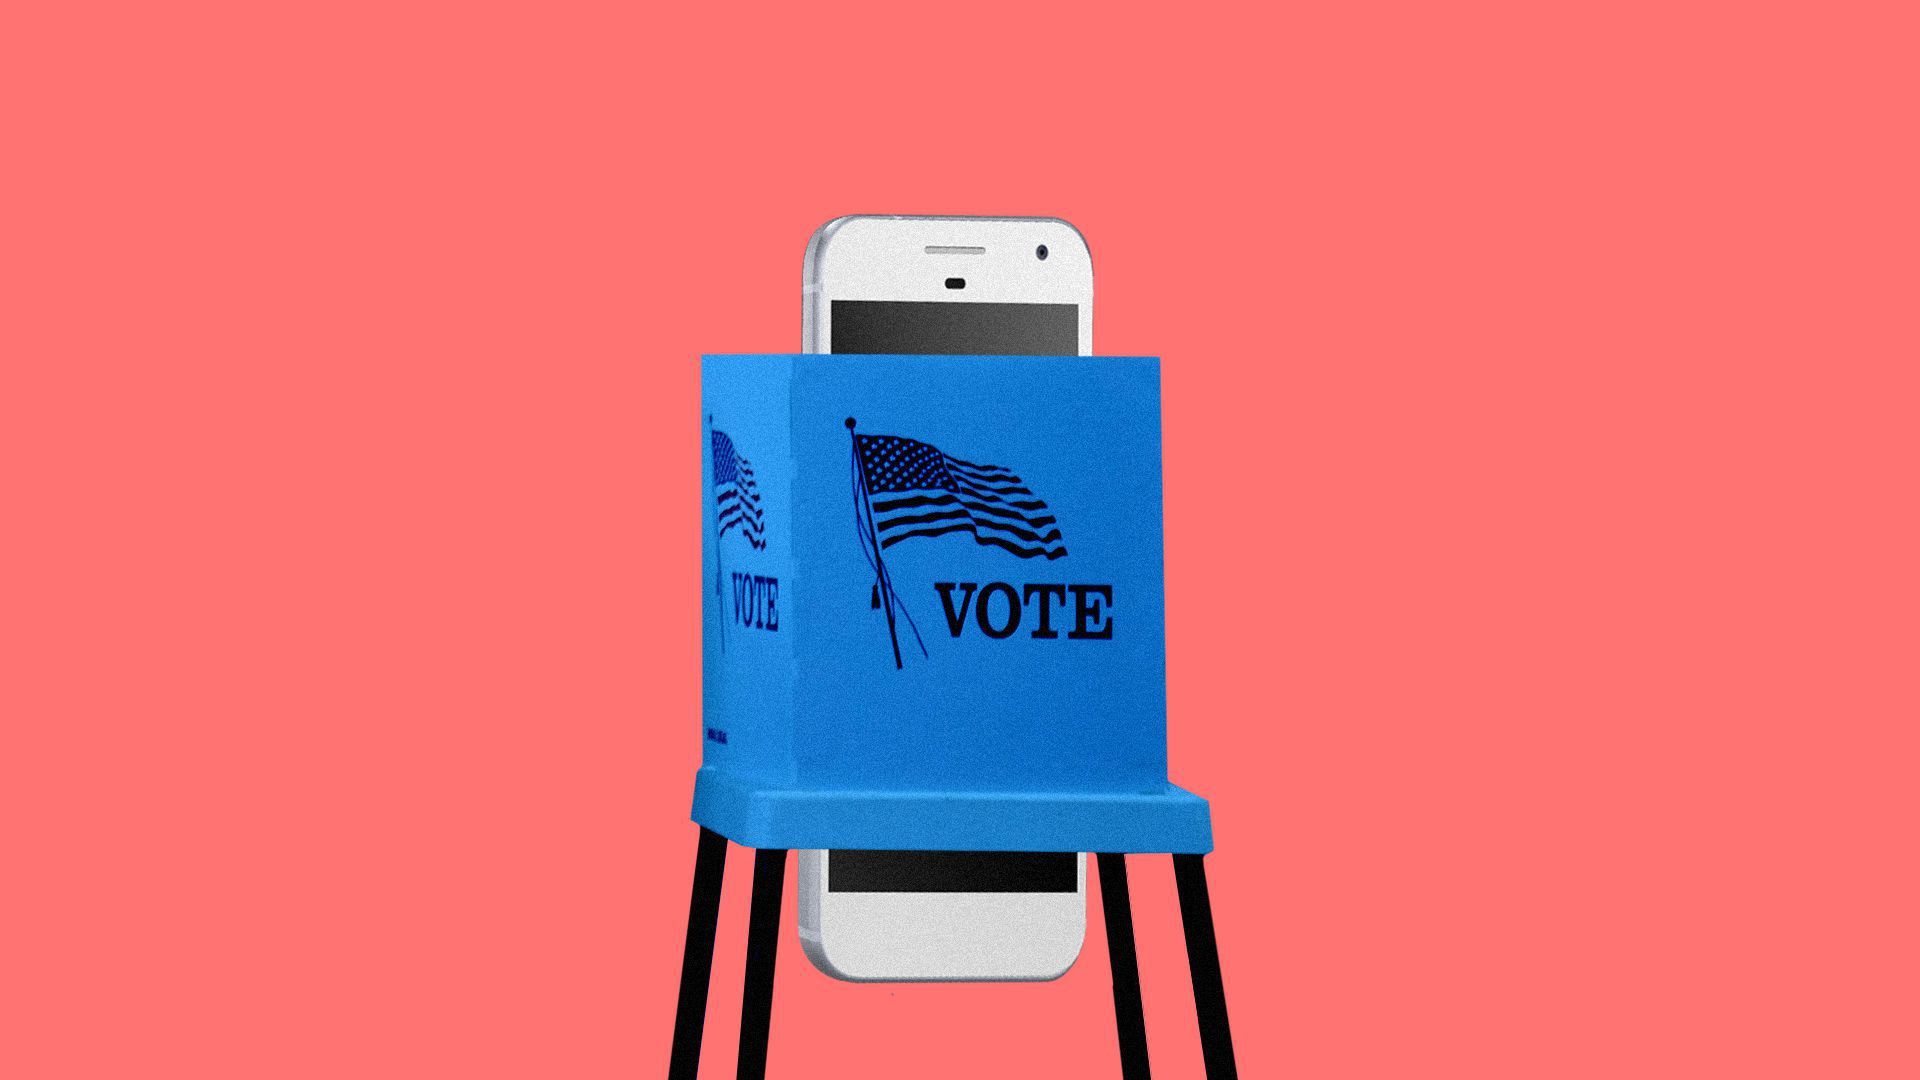 an illustration of an iphone in a voting booth